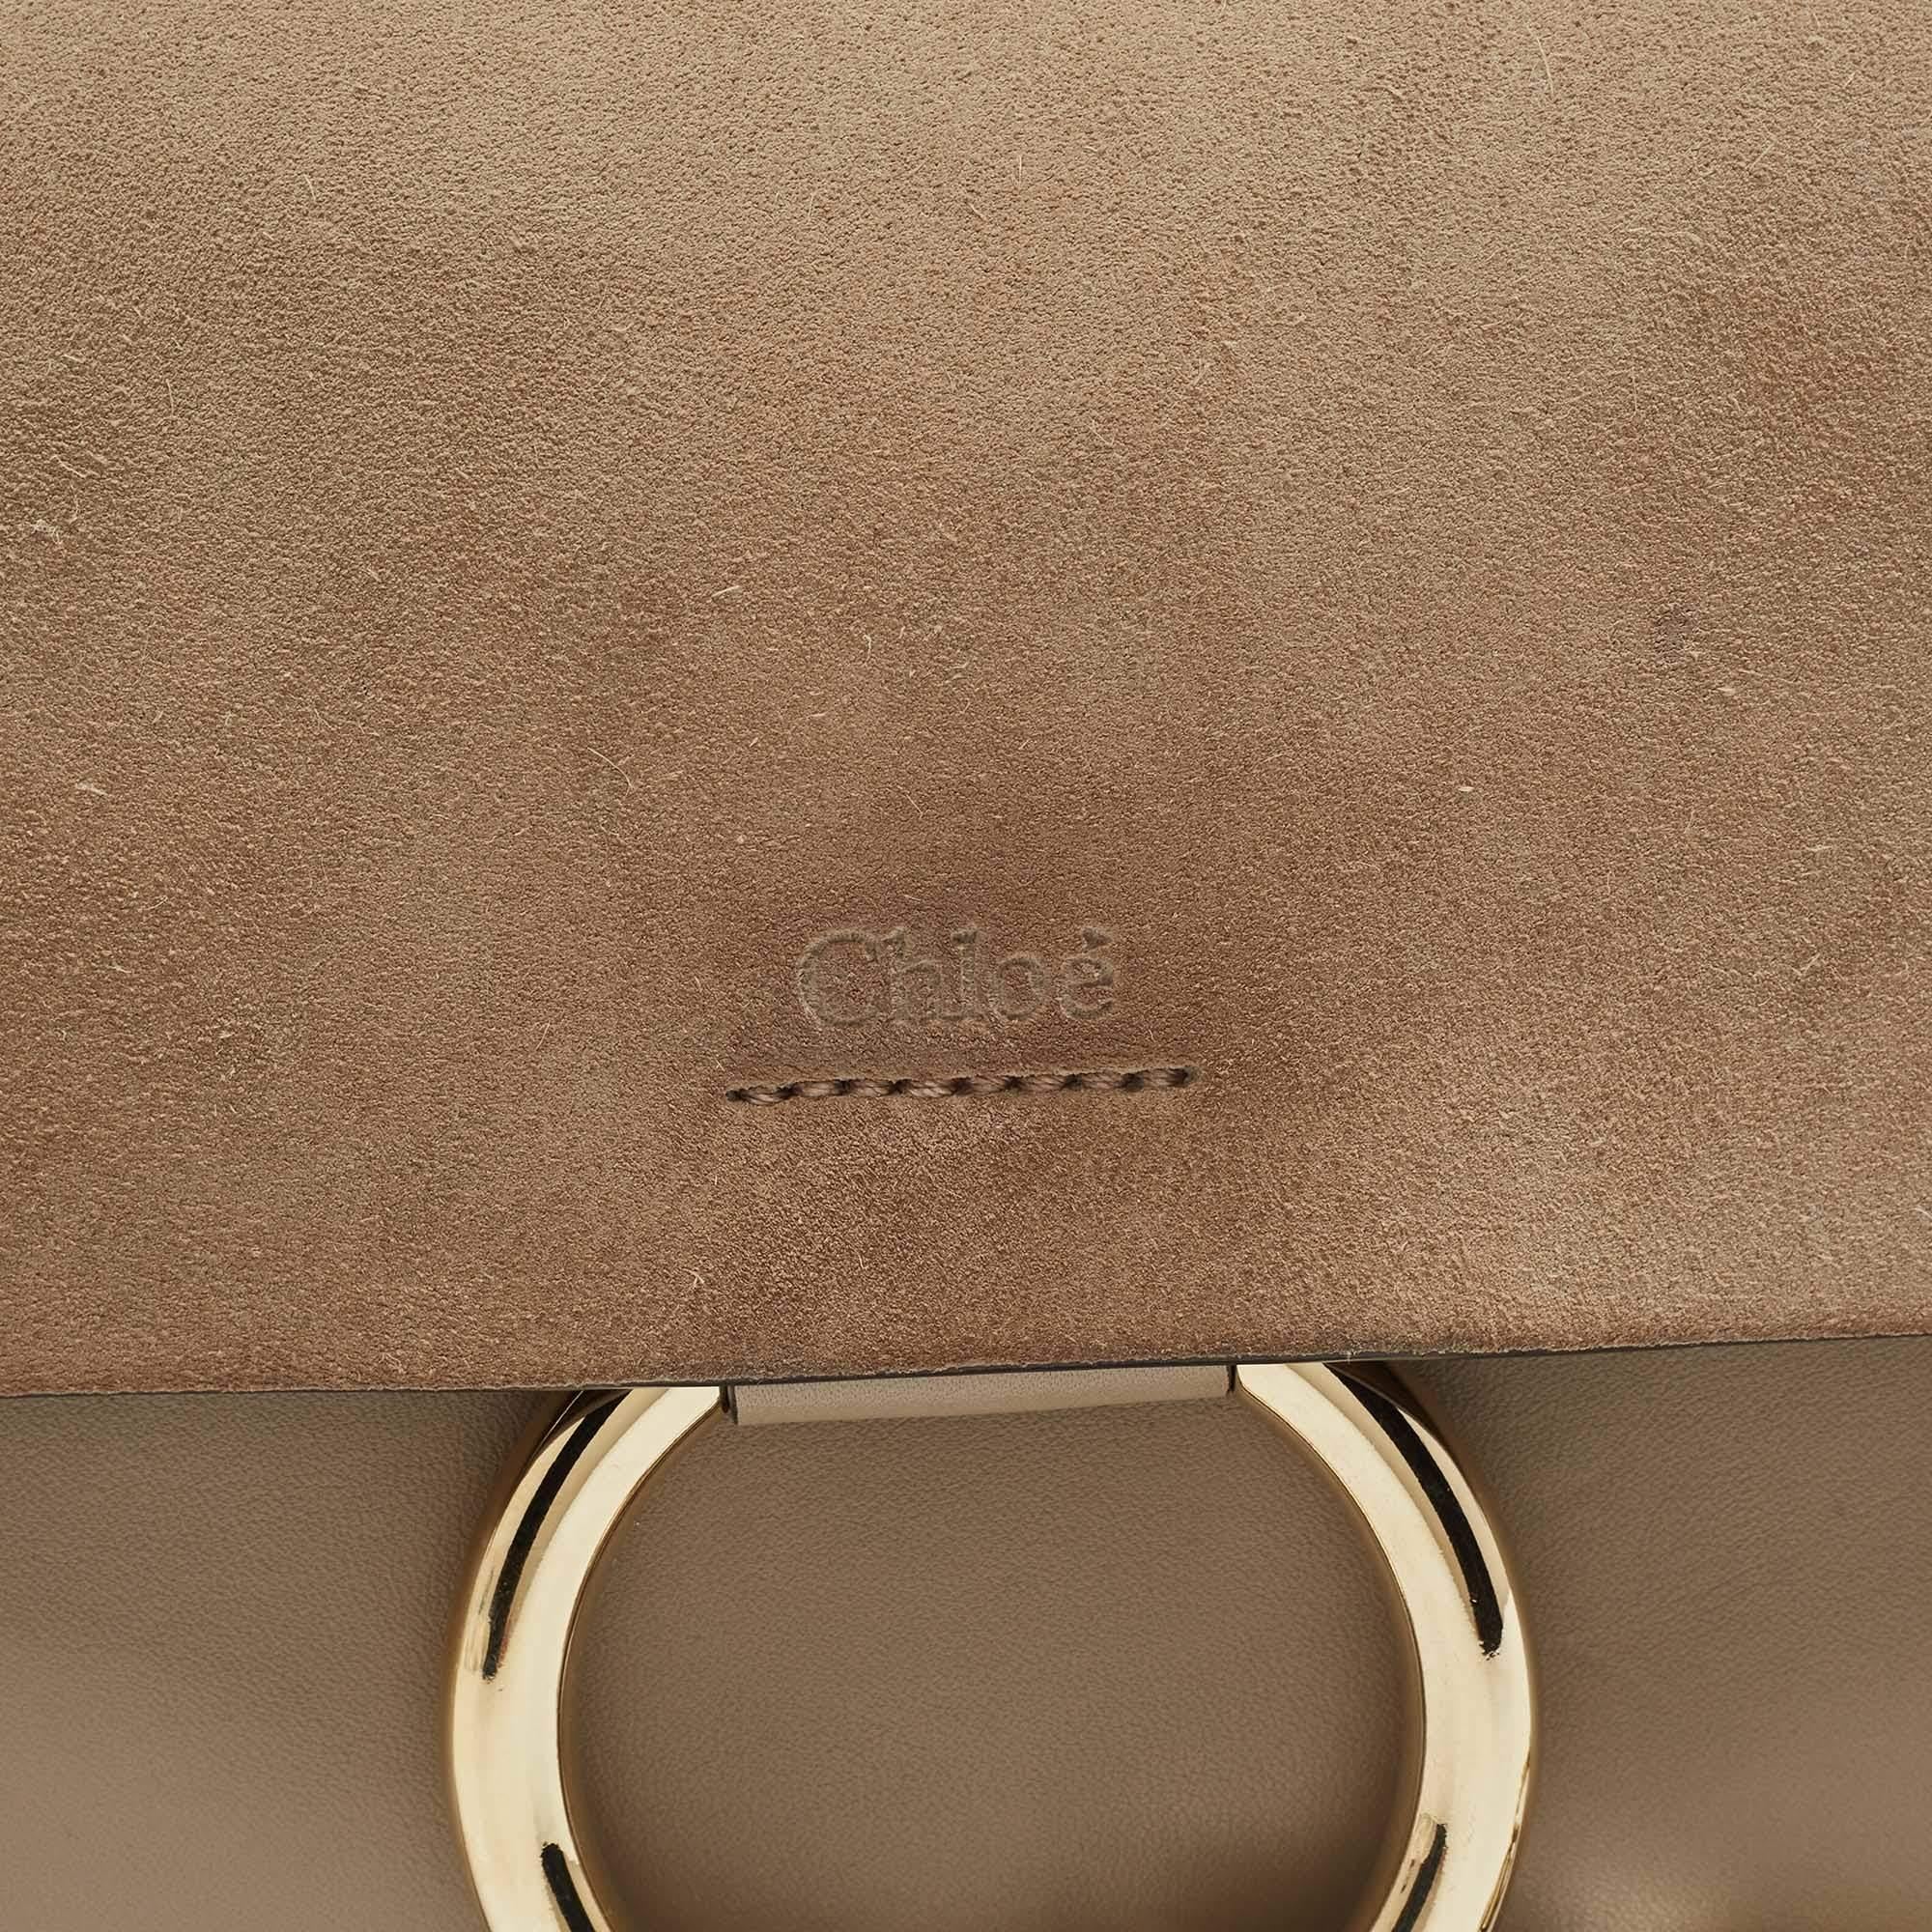 Chloe Taupe Leather and Suede Small Faye Shoulder Bag 4